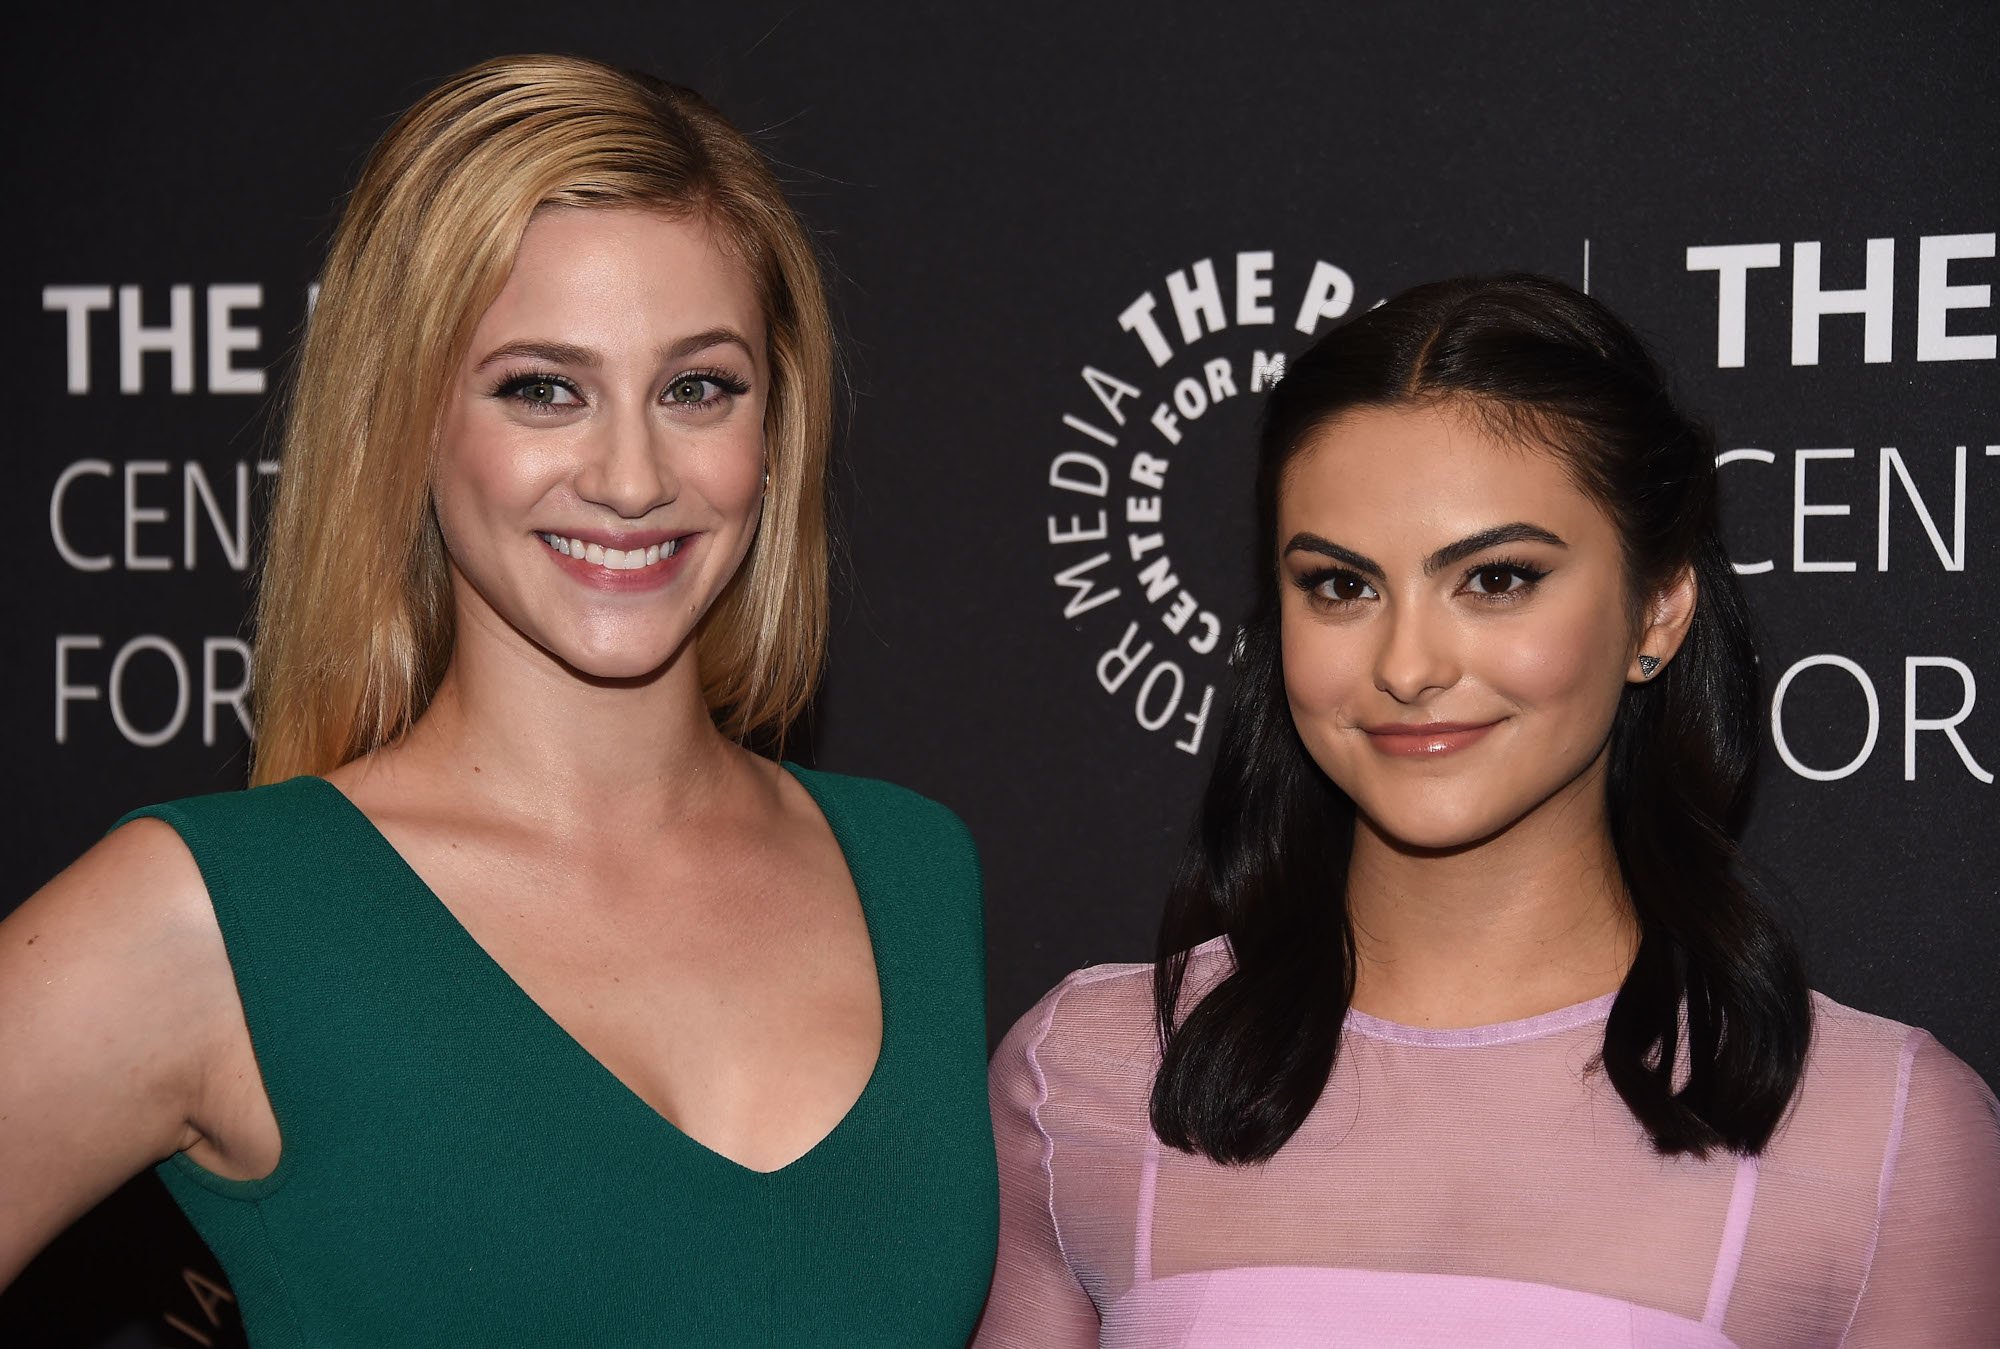 'Riverdale' Season 5 stars Lili Reinhart and Camila Mendes. They're standing side by side. Reinhart is wearing a green v-neck dress with her blonde hair down. Mendes is wearing a pink dress with her black hair half-up and half-down.